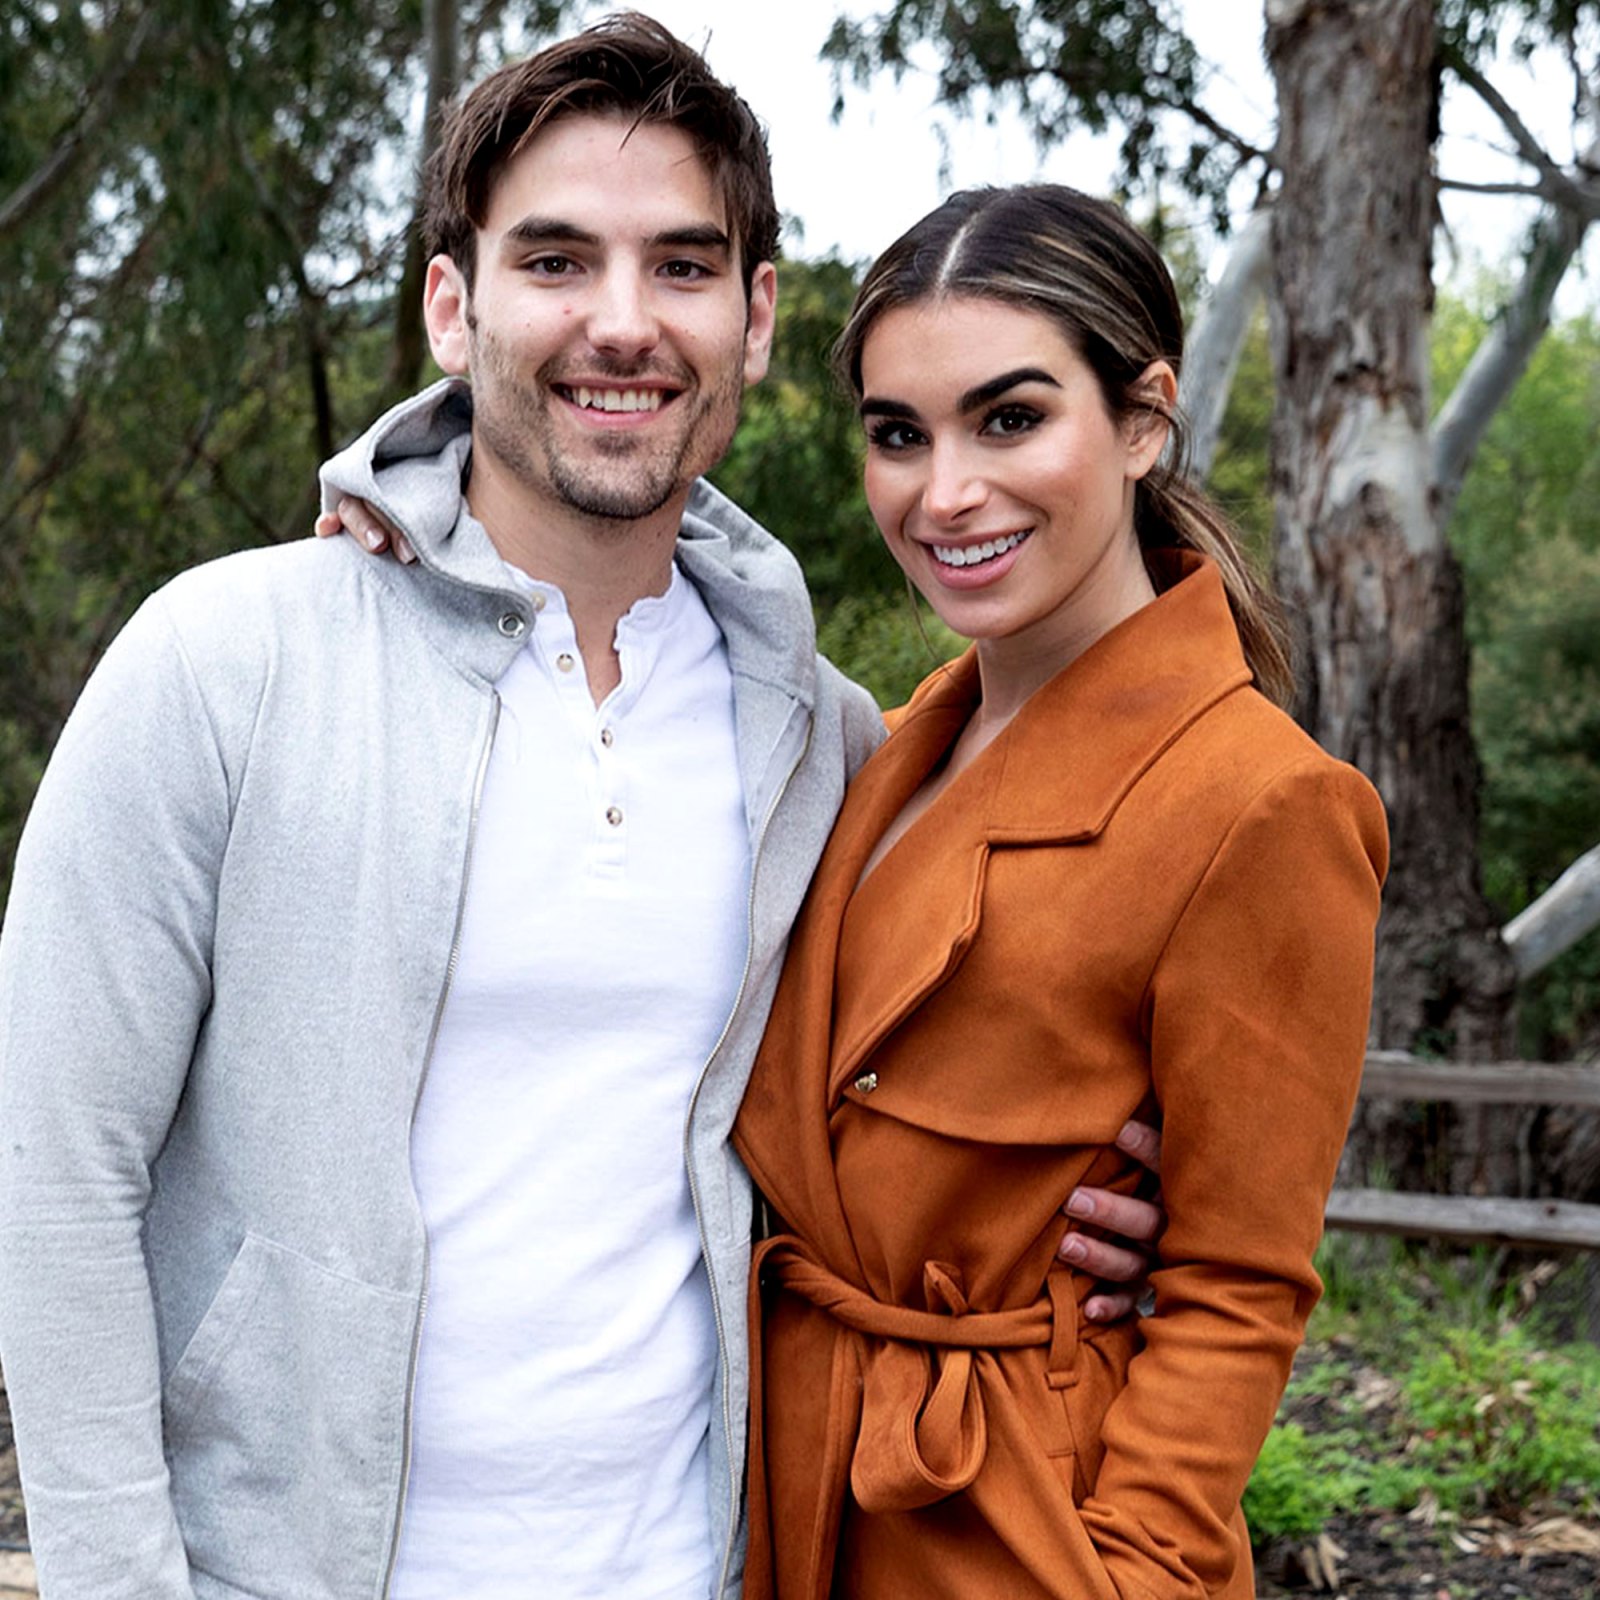 Bachelor in Paradise’s Ashley Iaconetti and Jared Haibon’s Best Parenting Quotes